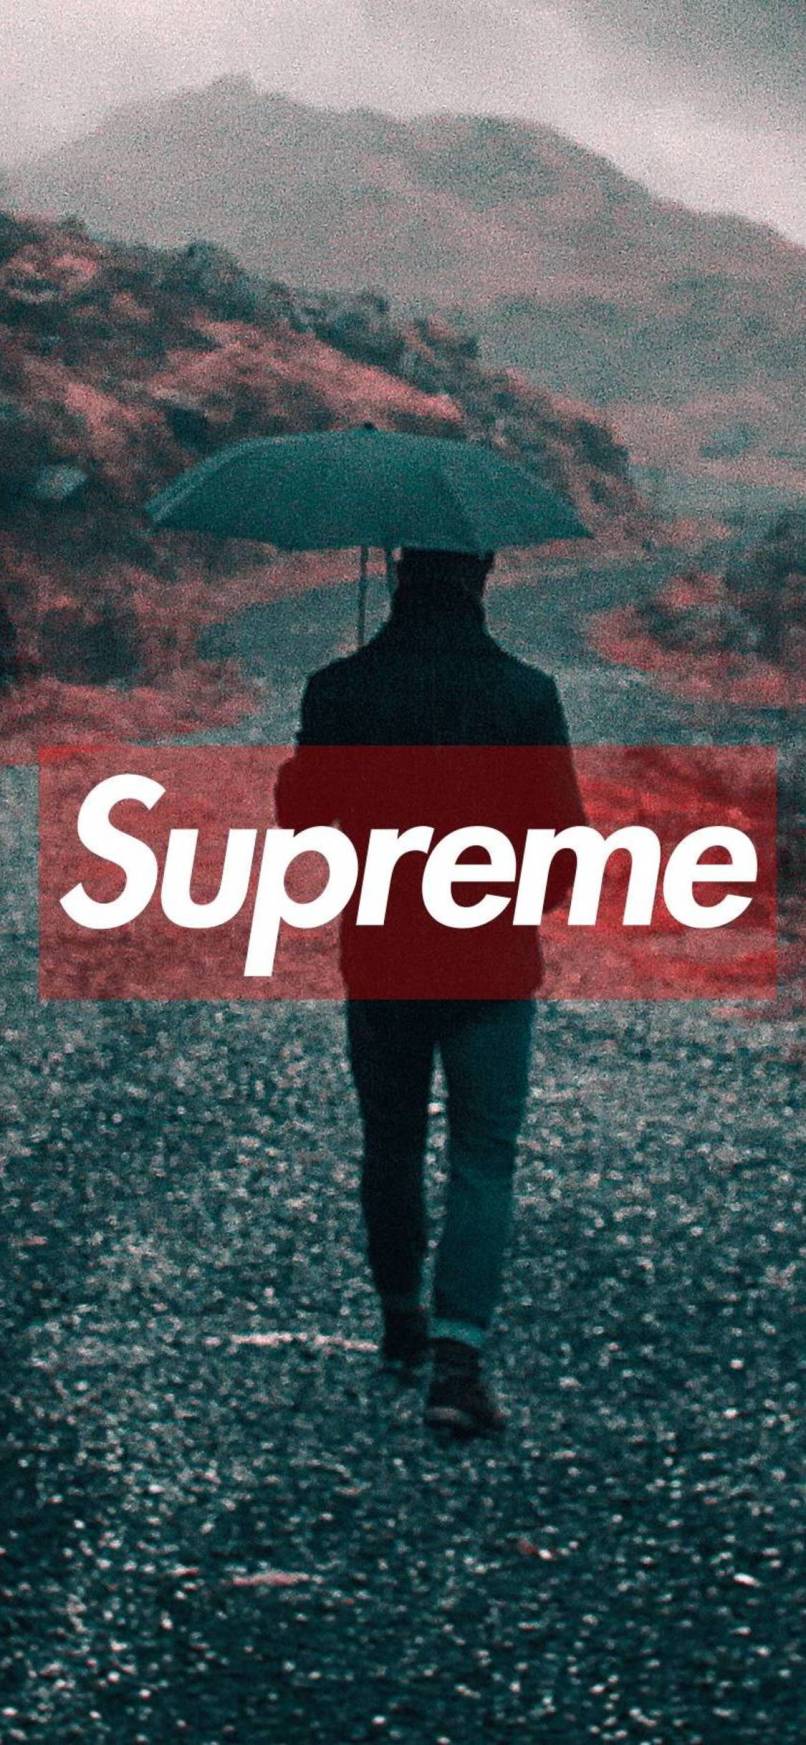 Supreme Wallpapers Iphone X Hd